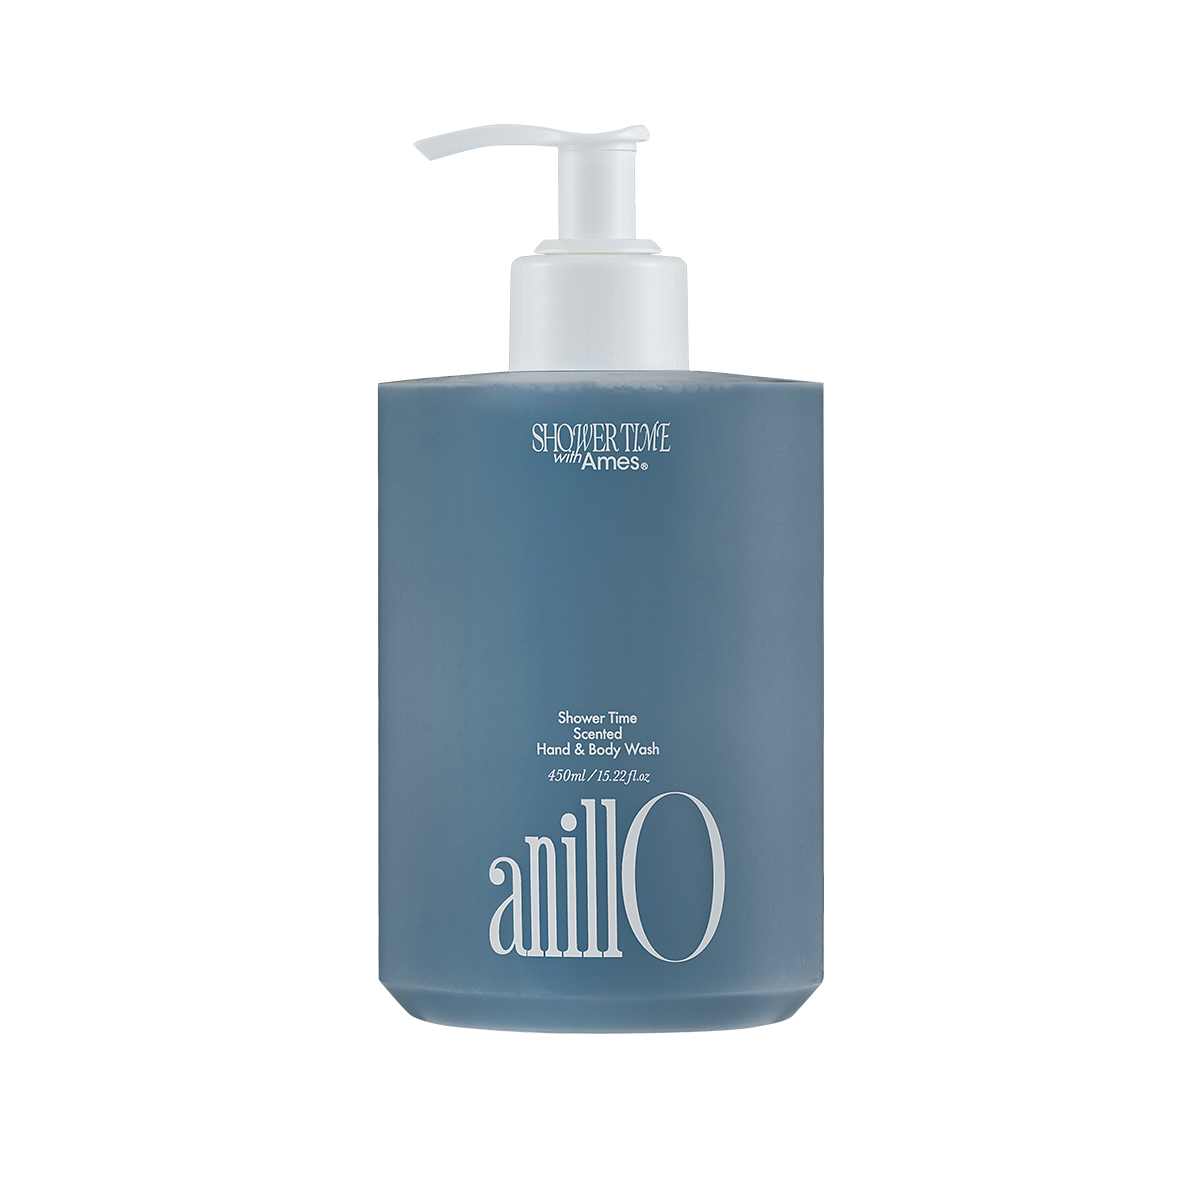 ANILLO Shower Time Scented Hand & Body Wash 450ml